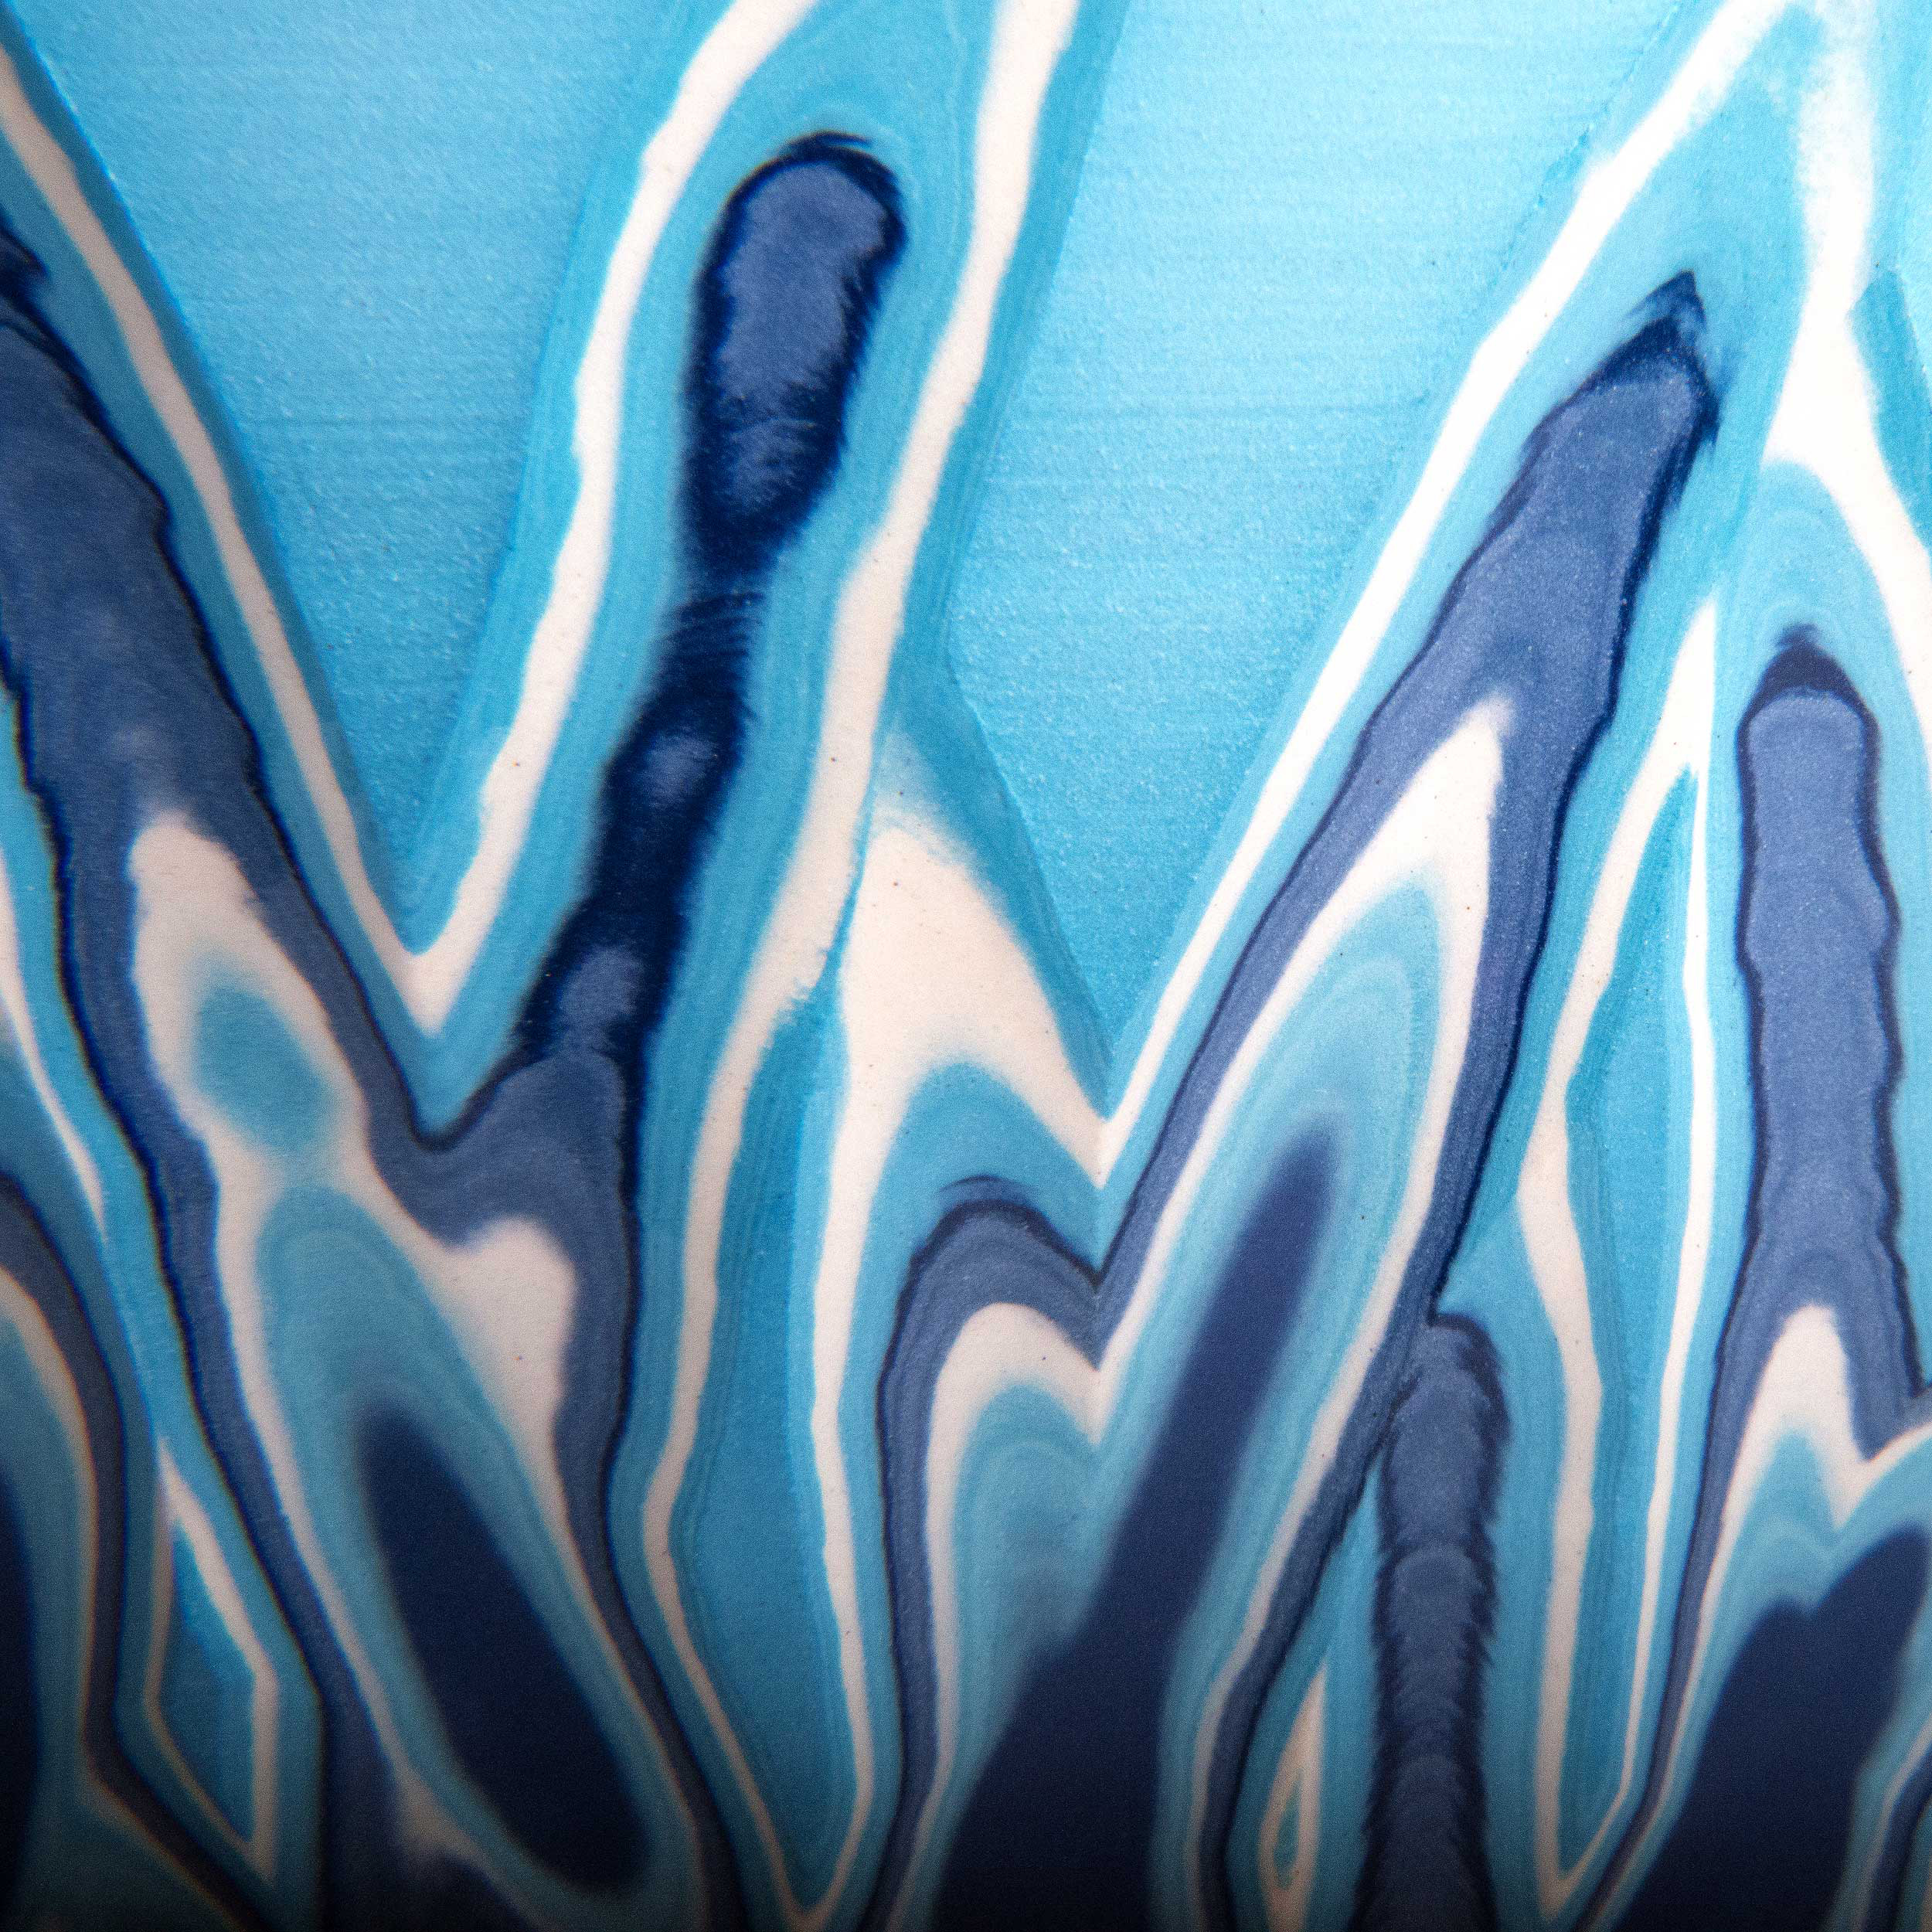 Sgraffito Blue Turquoise Ceramic Detail by Rowena Gilbert